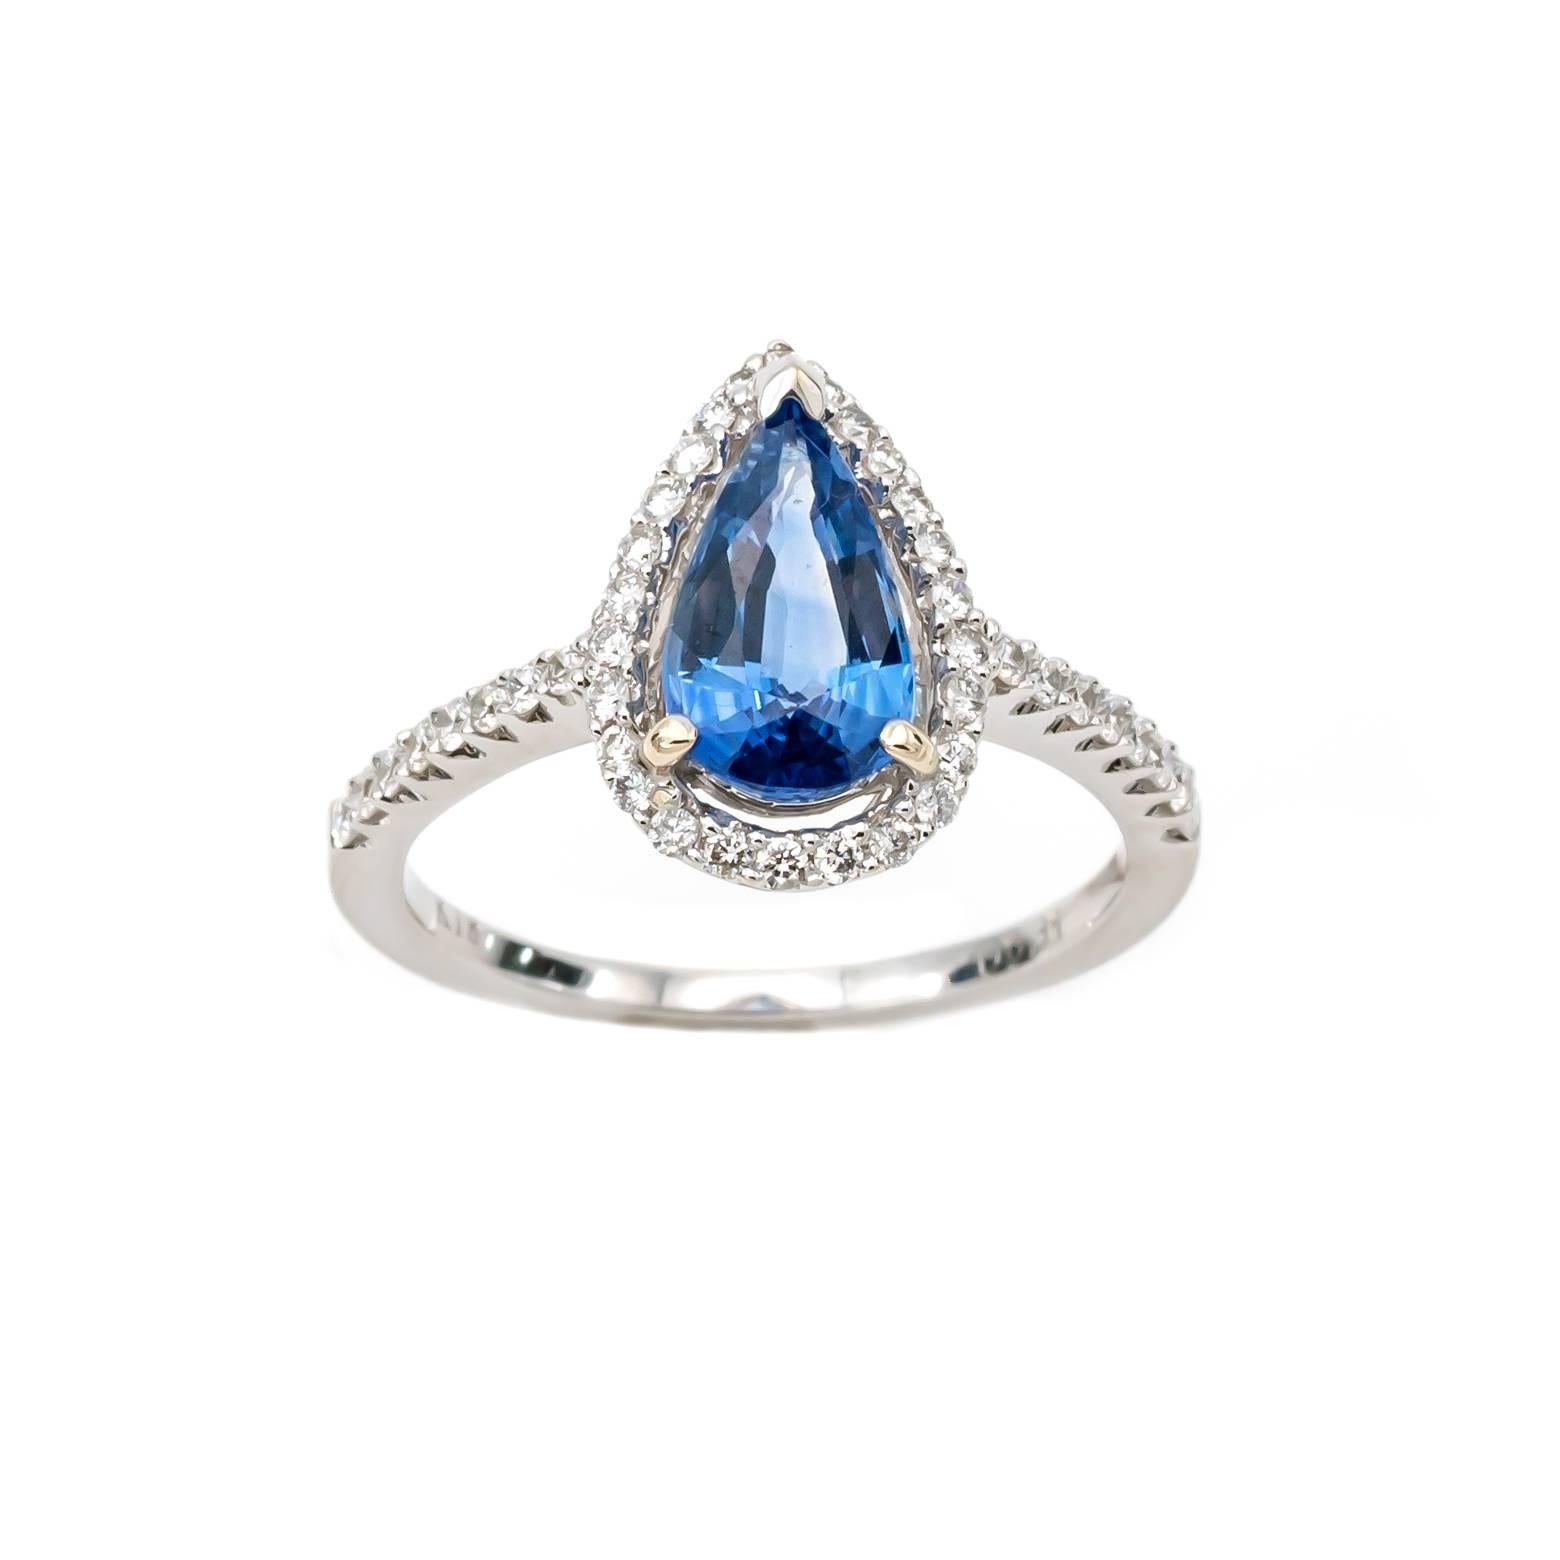 This stunning sapphire and Diamond ring is so pretty.!! The Pear shape sapphire is 1.7 ct and the total weight of the diamonds surrounding 0.36 tw. The setting is 18k white gold and the size of the ring is size 6 1/4 and can be sized to fit your